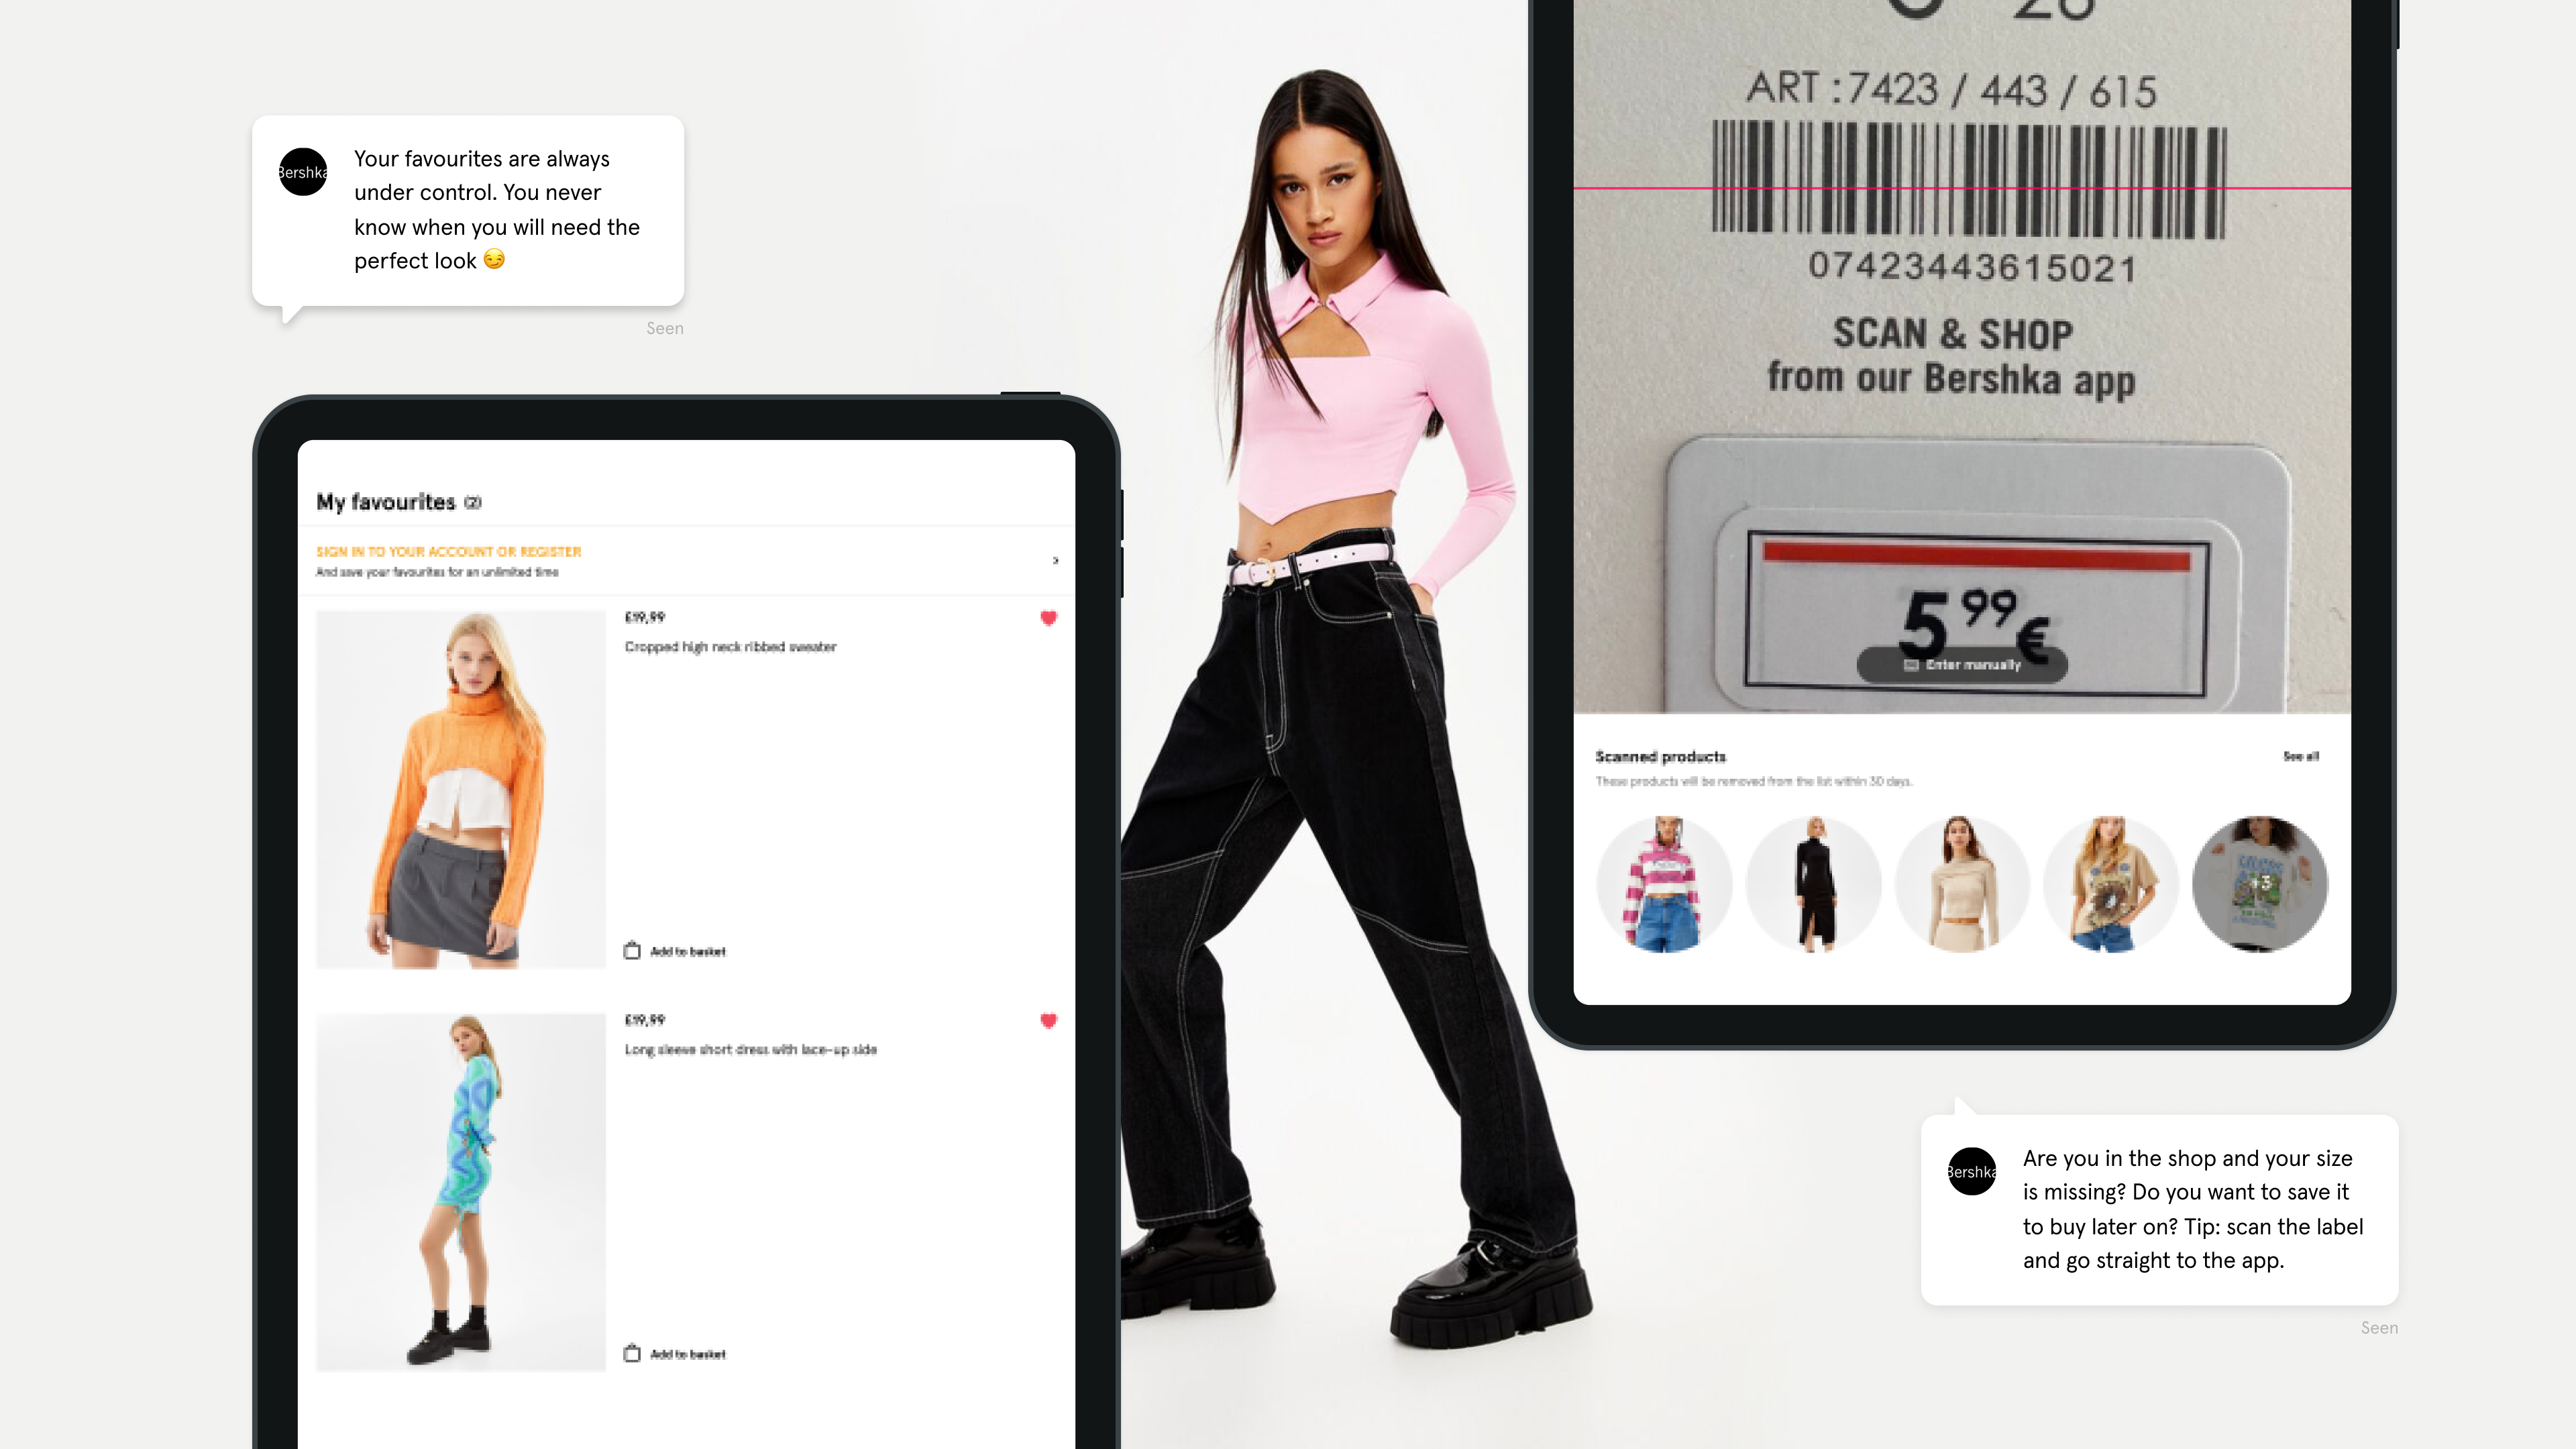 Bershka: Fashion & trends APK 9.3.1 for Android – Download Bershka: Fashion  & trends APK Latest Version from APKFab.com